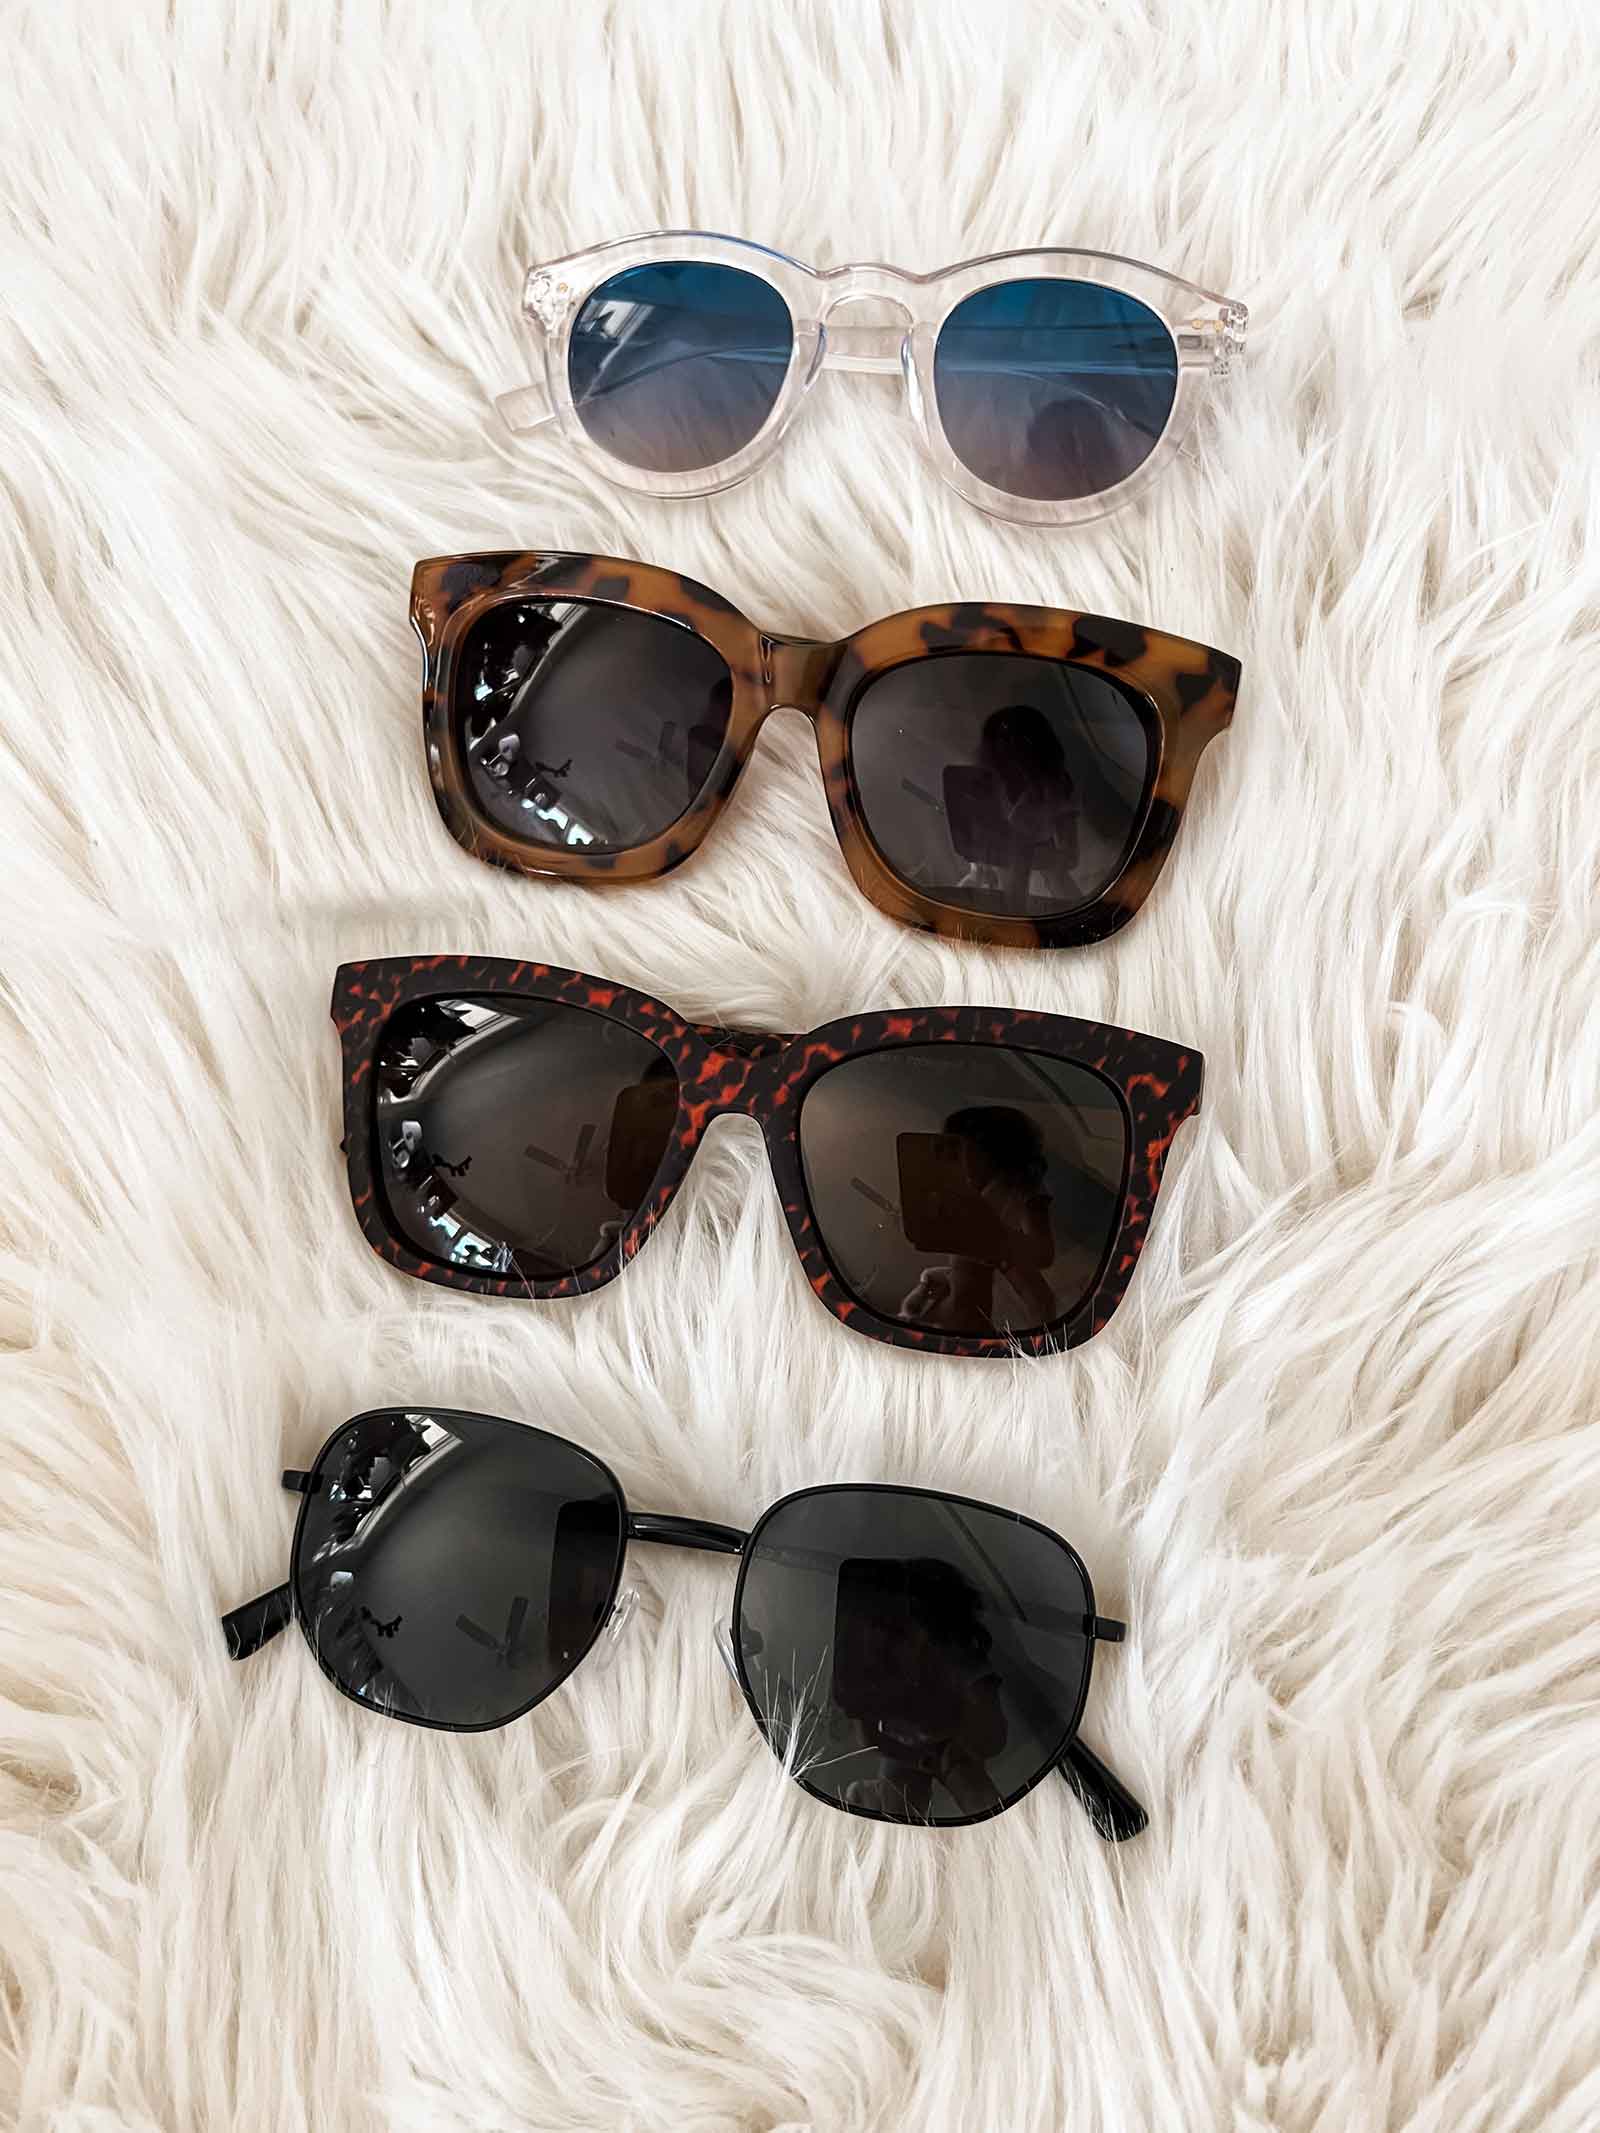 Budget Babe reviews four new polarized sunglass styles under $29 from Peepers